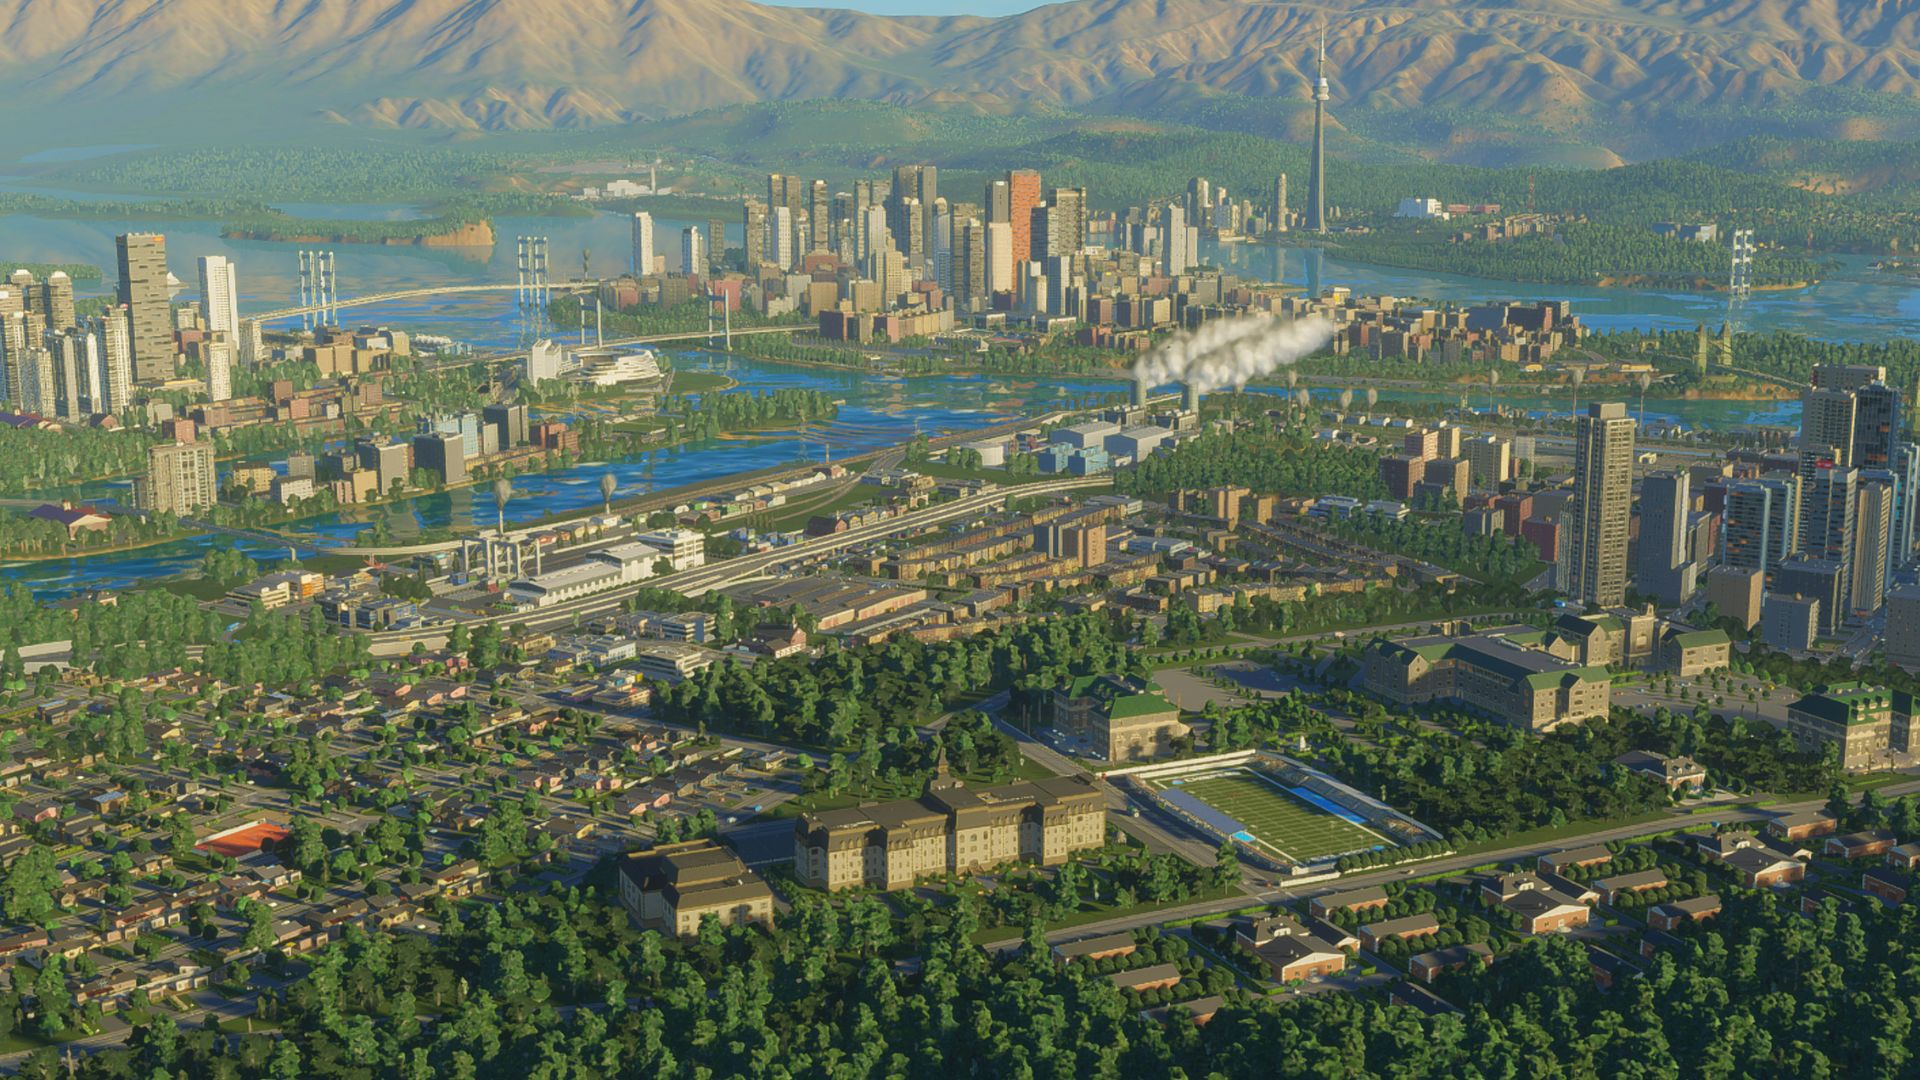 Cities Skylines 2 mod land values bug: A huge metropolis from Colossal Order city building game Cities Skylines 2